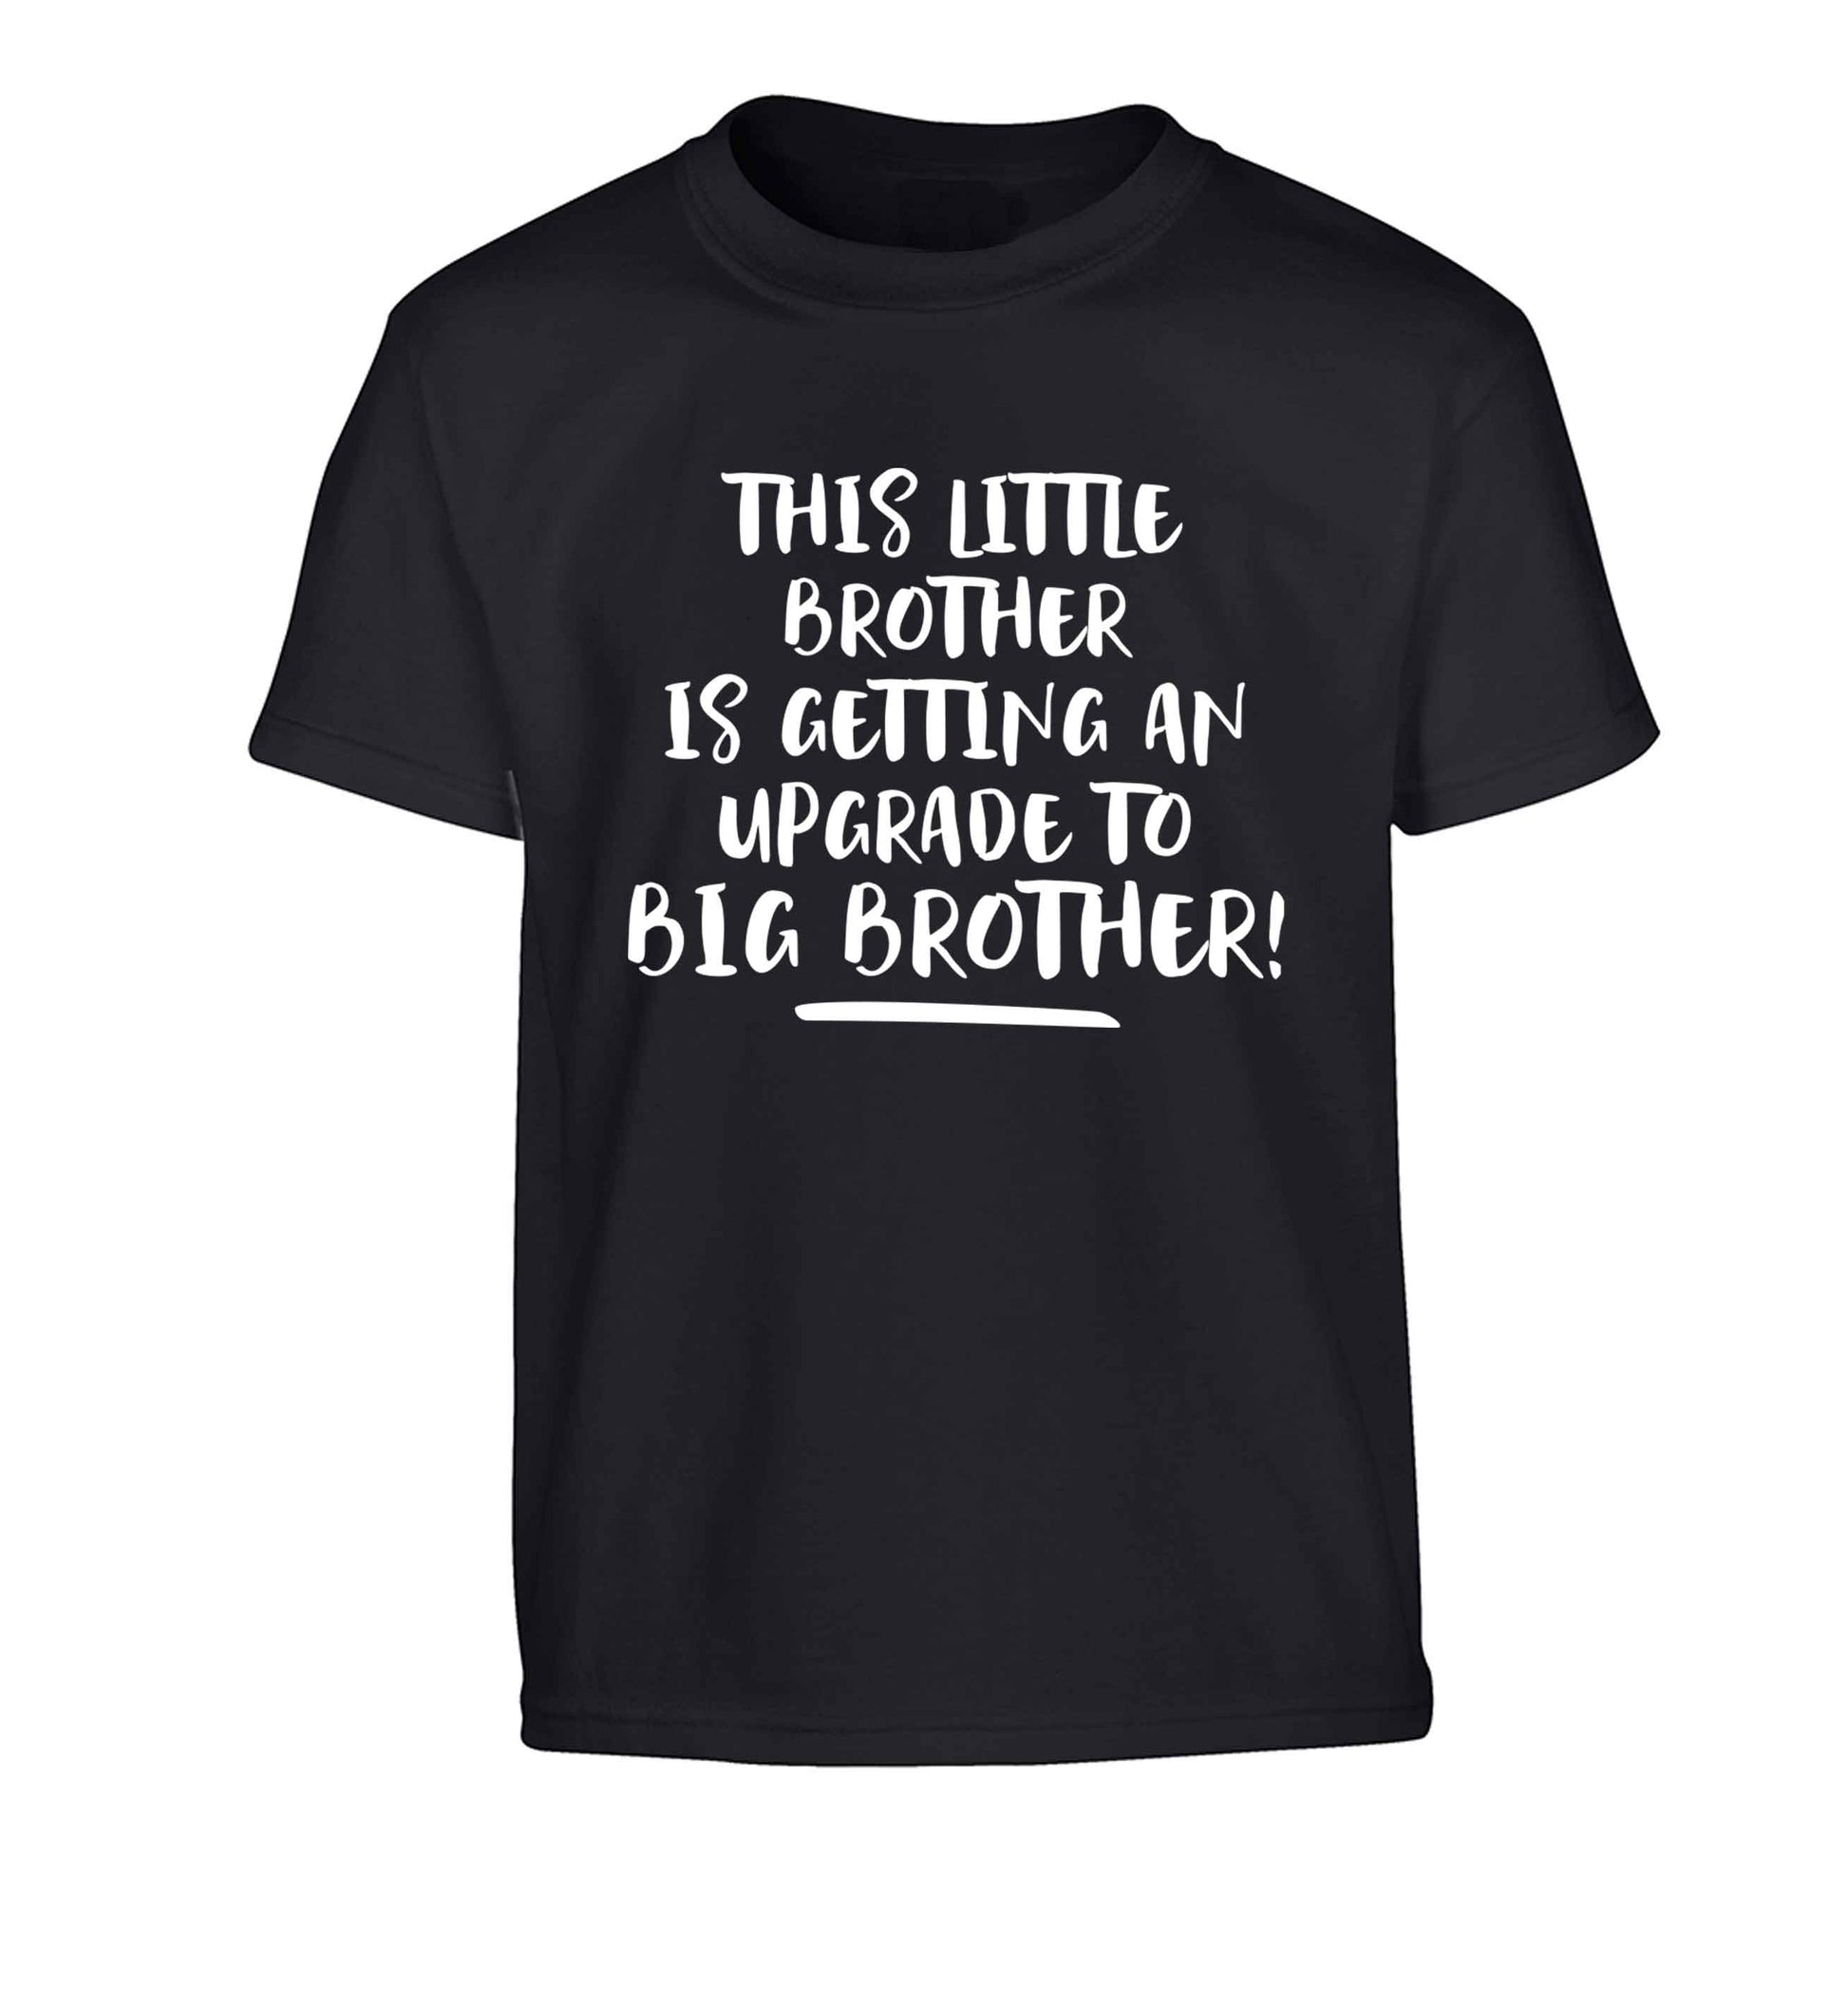 This little brother is getting an upgrade to big brother! Children's black Tshirt 12-13 Years